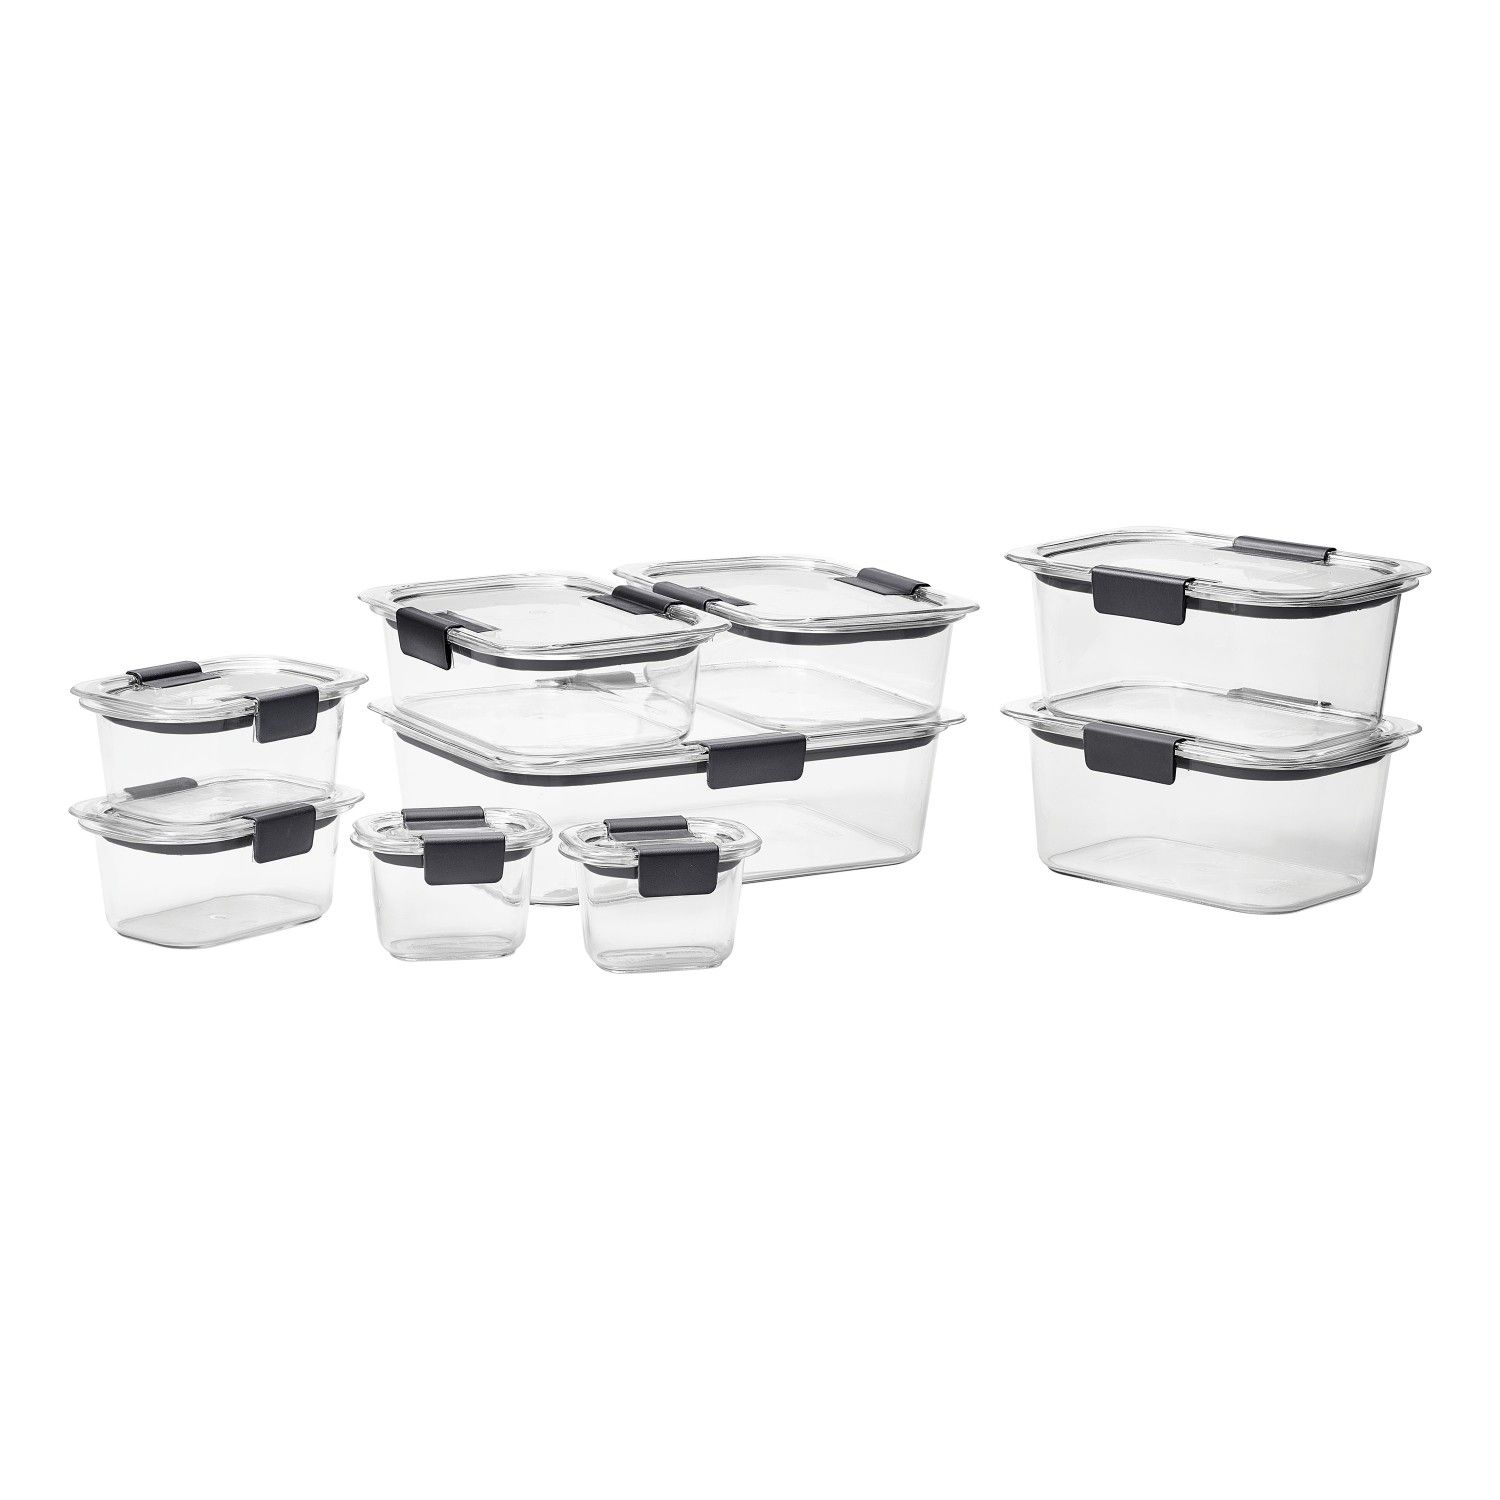 Rubbermaid Brilliance Food Storage Containers, 10-Piece Set